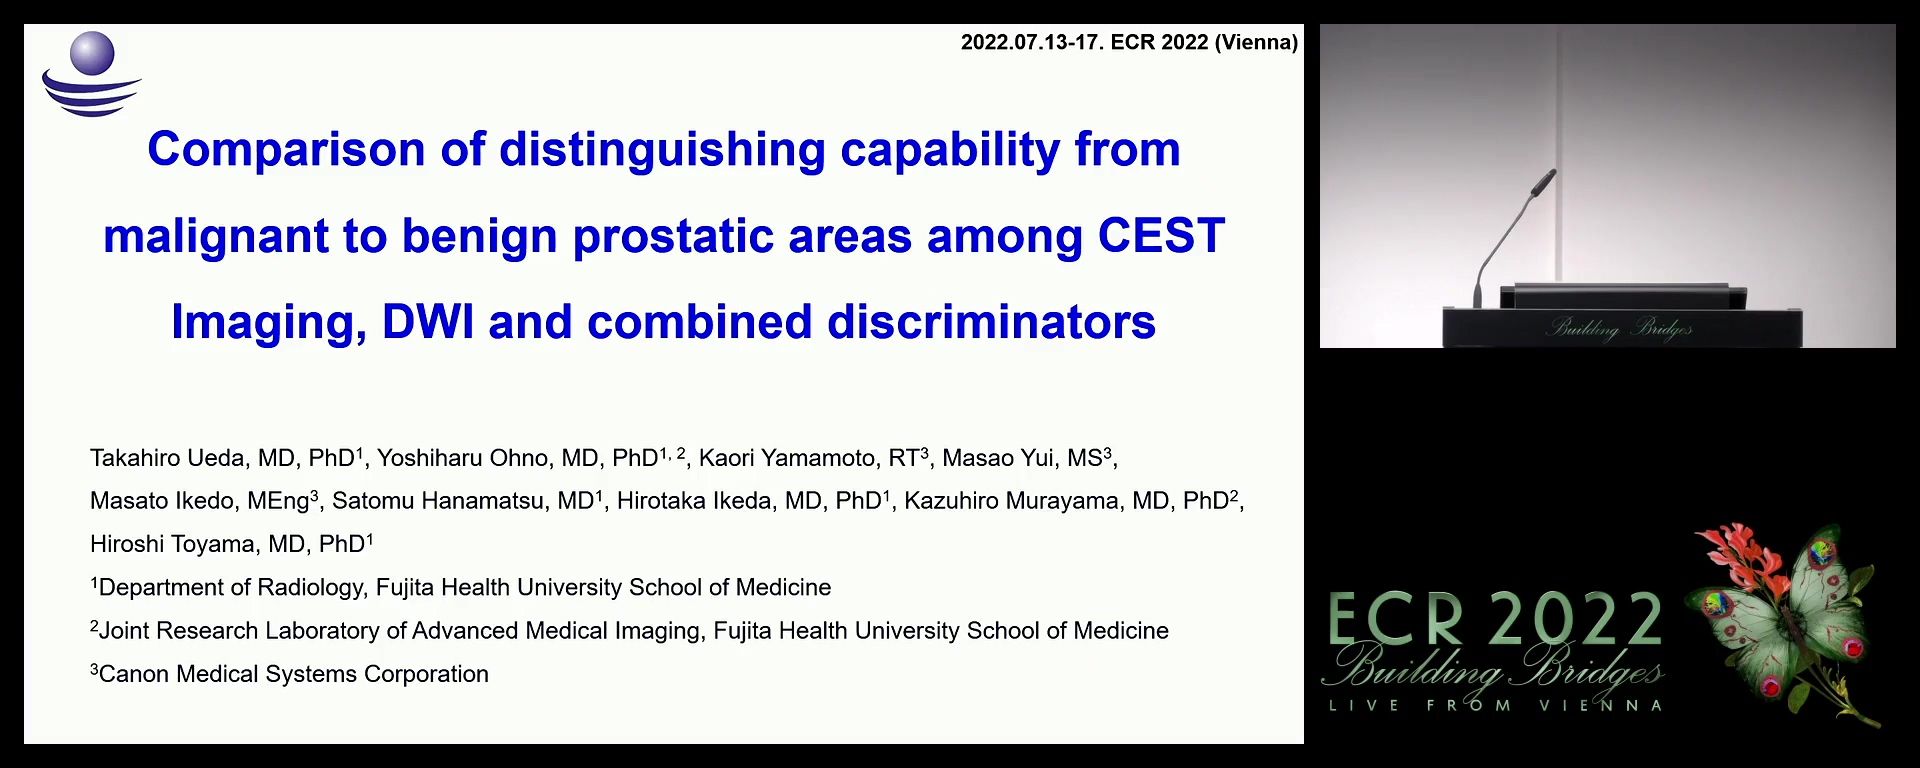 Comparison of distinguishing capability from malignant to benign prostatic areas among CEST Imaging, DWI and combined discriminators - Yoshiharu Ohno, Toyoake / JP